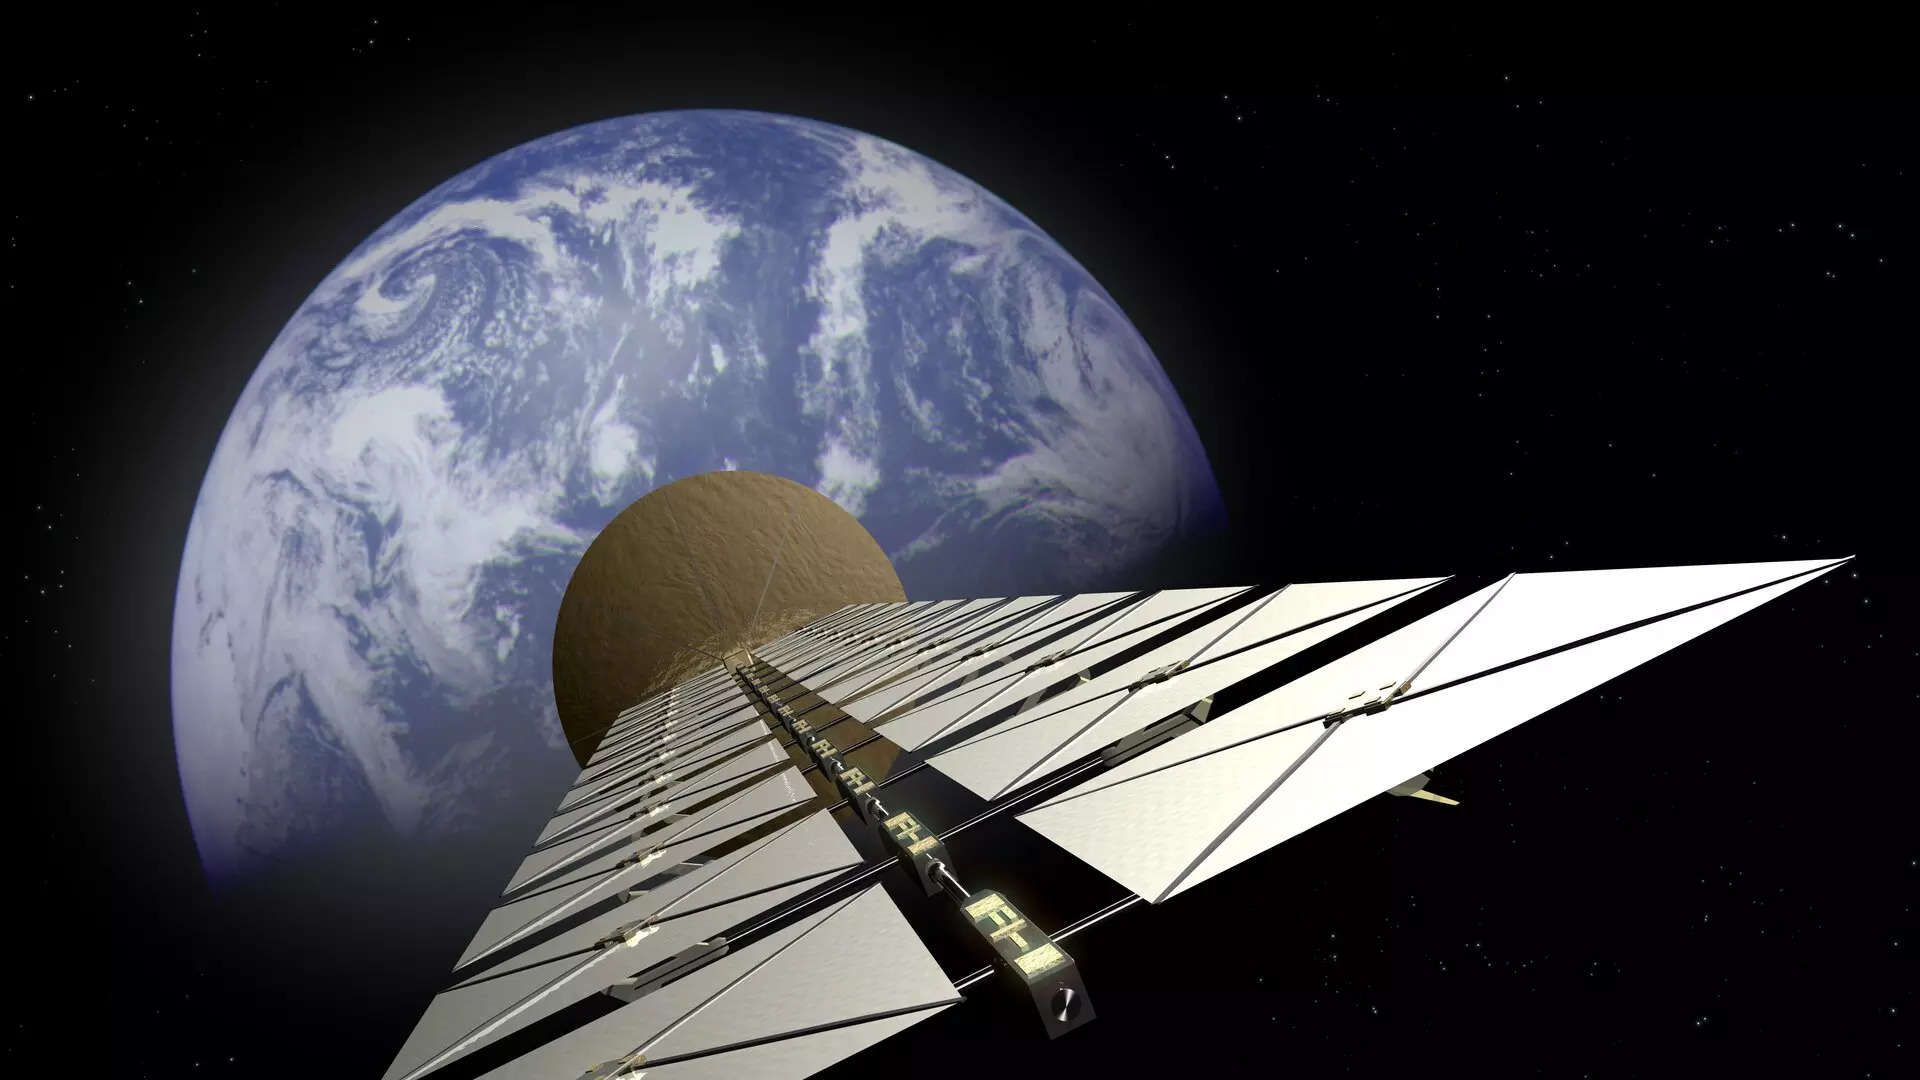 European space agency unveils plan to create floating solar farm in space . (Image source: ESA)